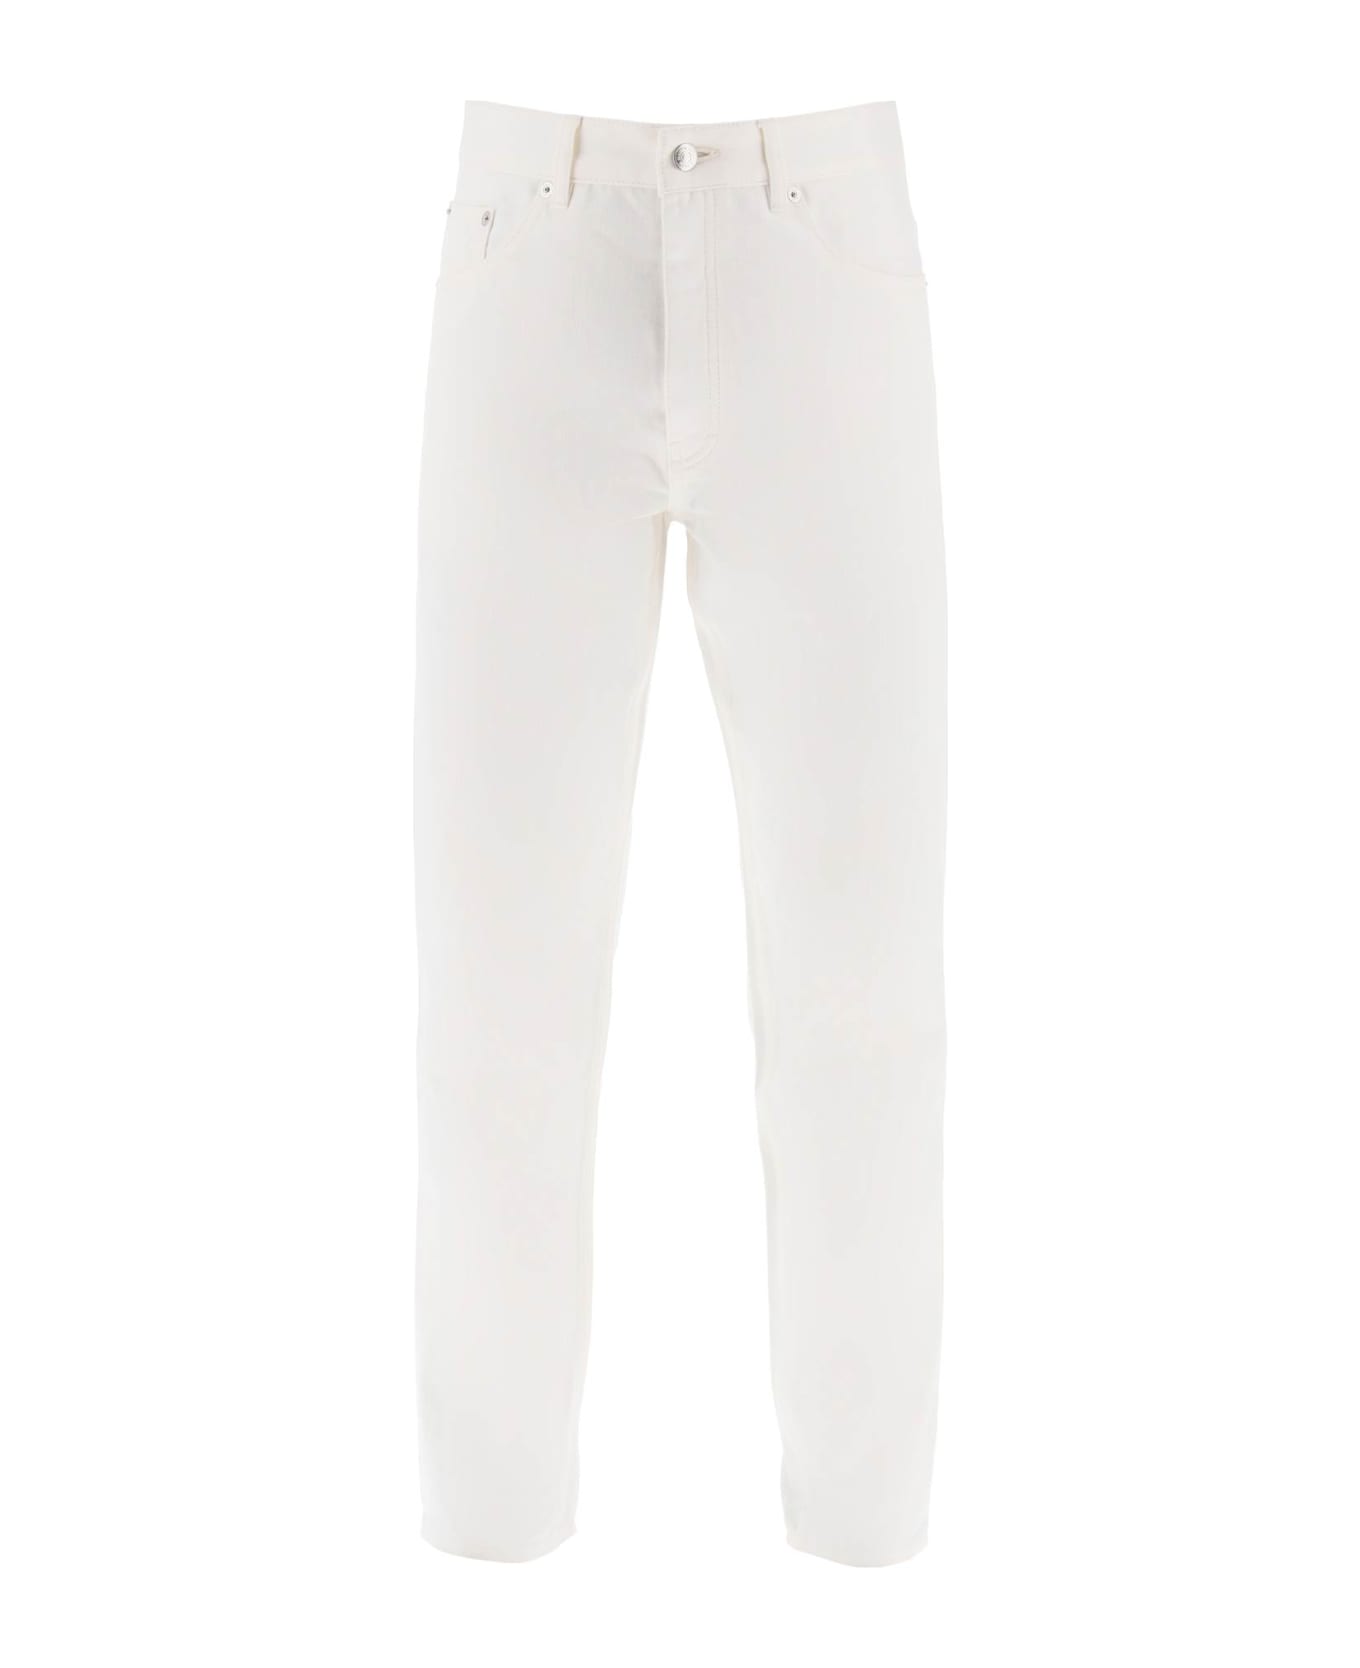 Maison Kitsuné Low-rise Tapered Jeans - OFF WHITE (White)